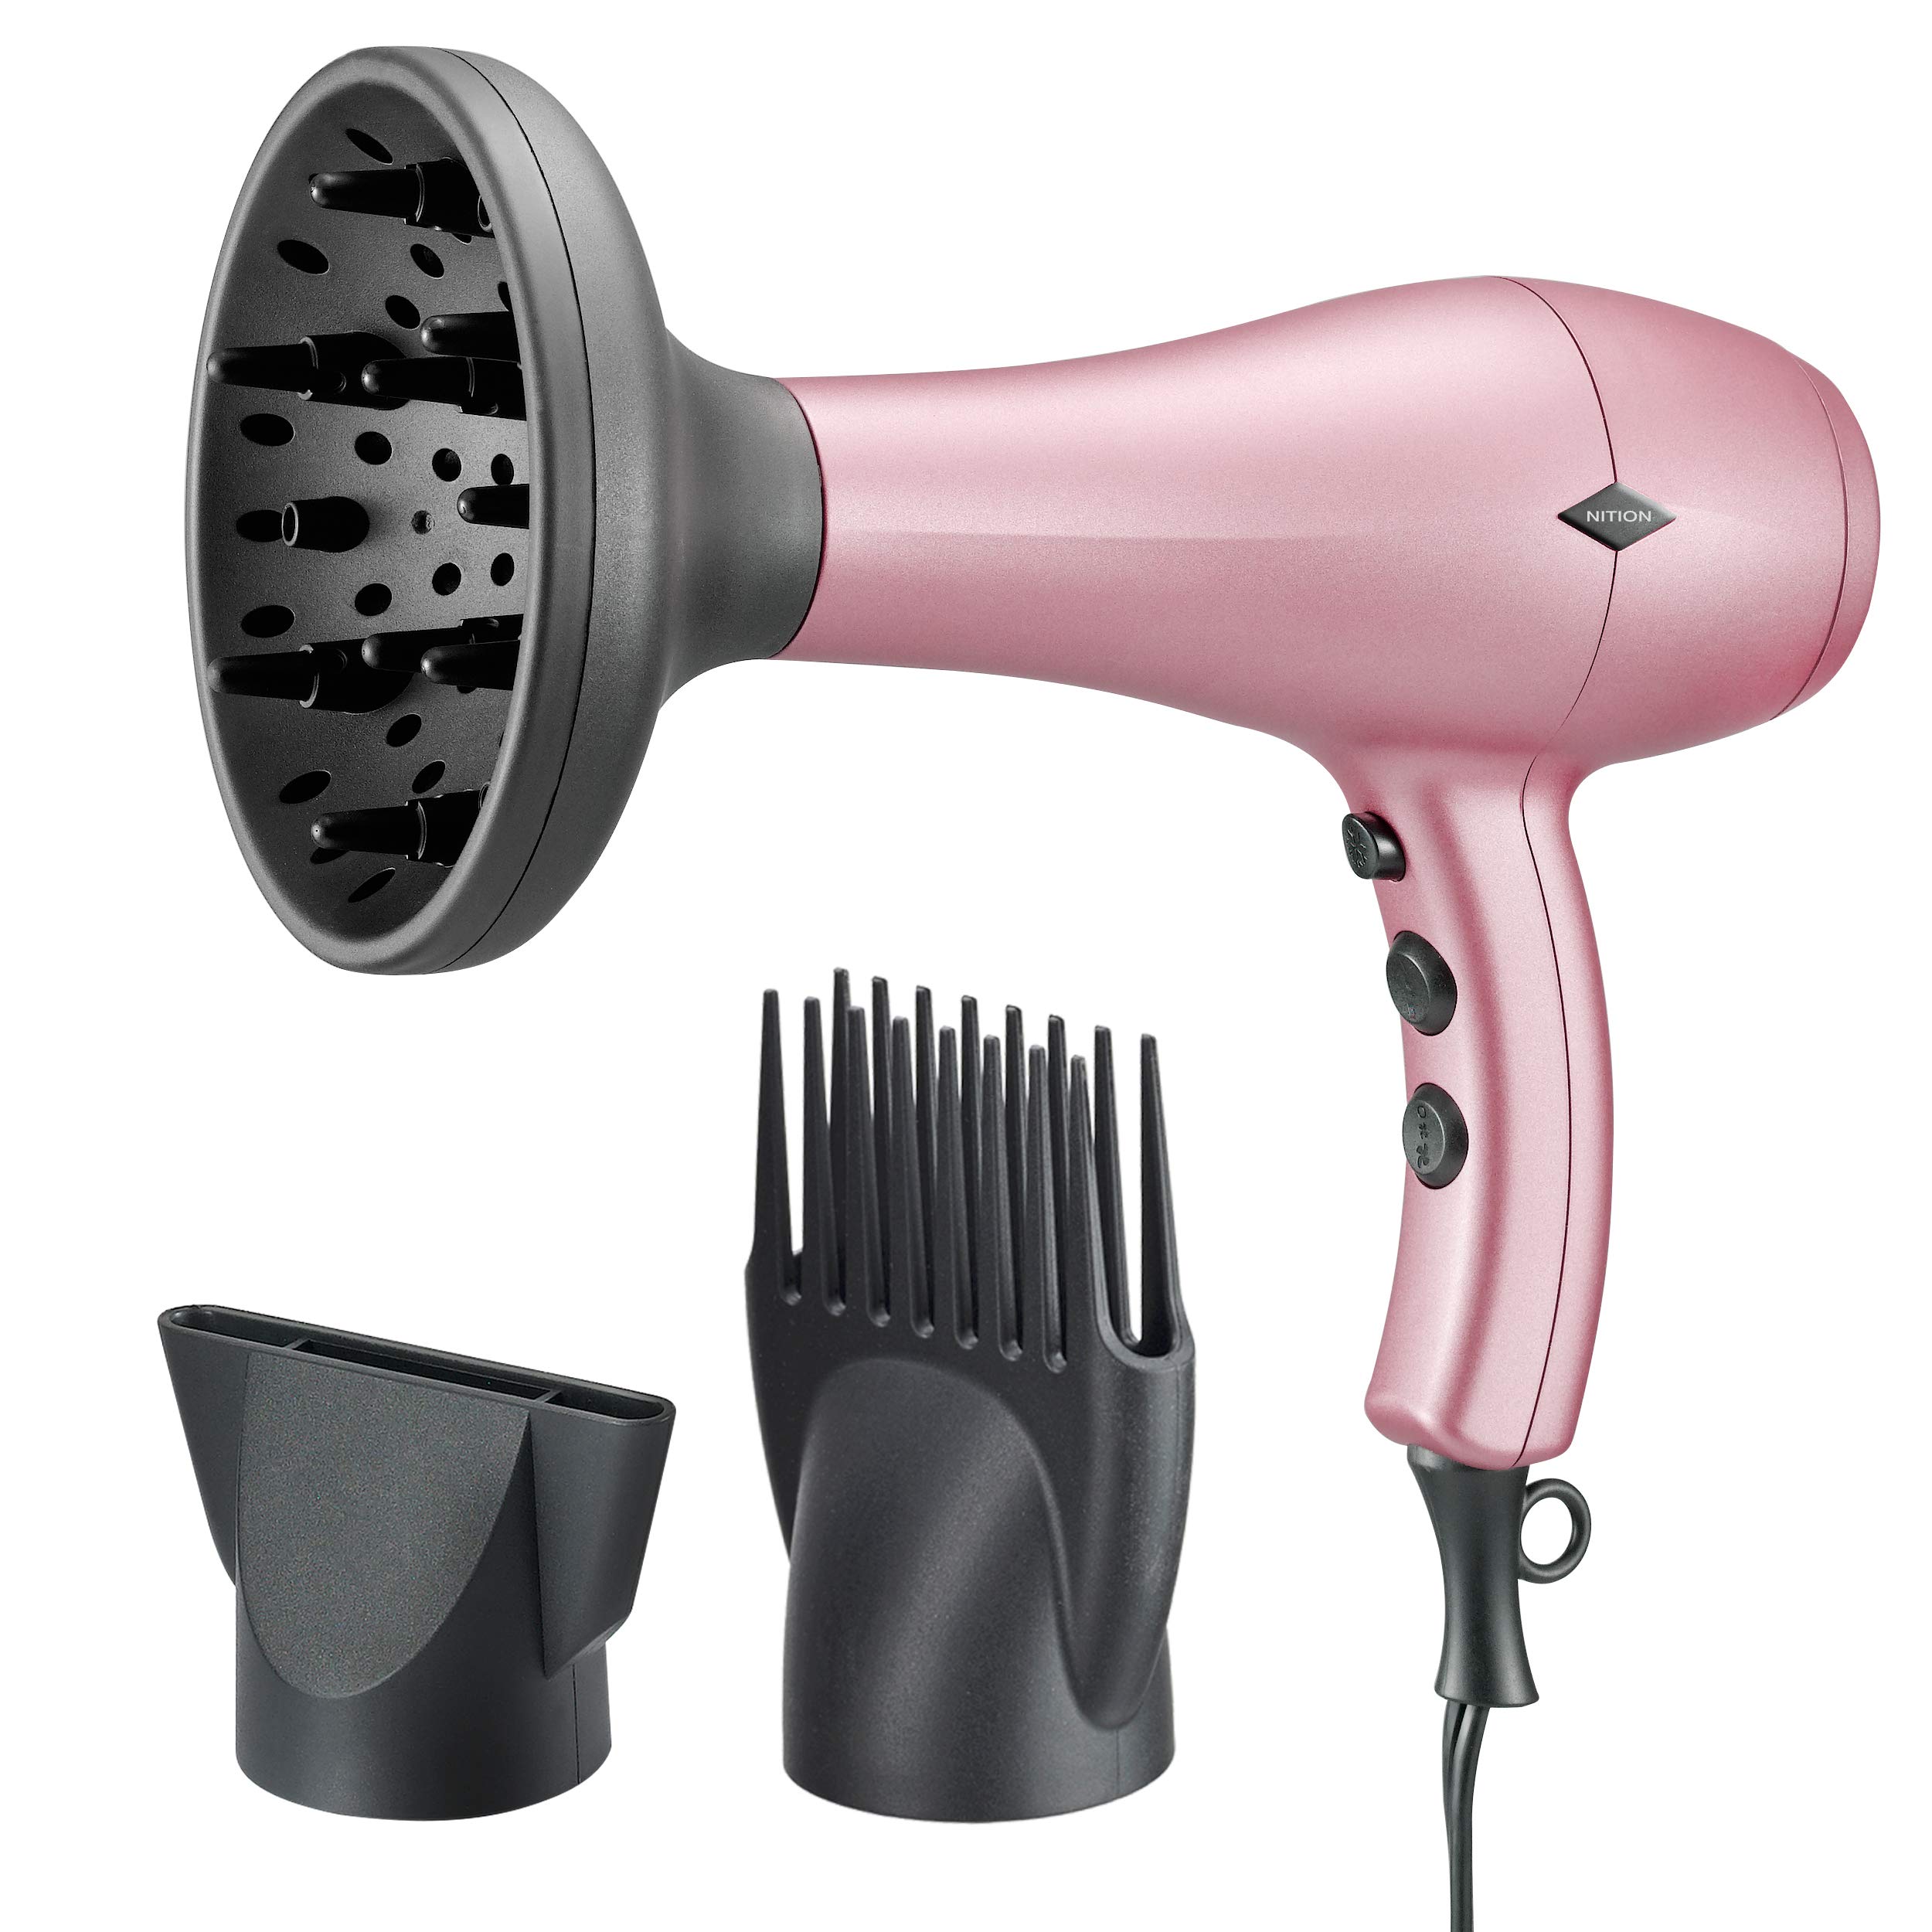 Hair dryer, 2 speeds and 3 heat settings. Includes concentrator and...